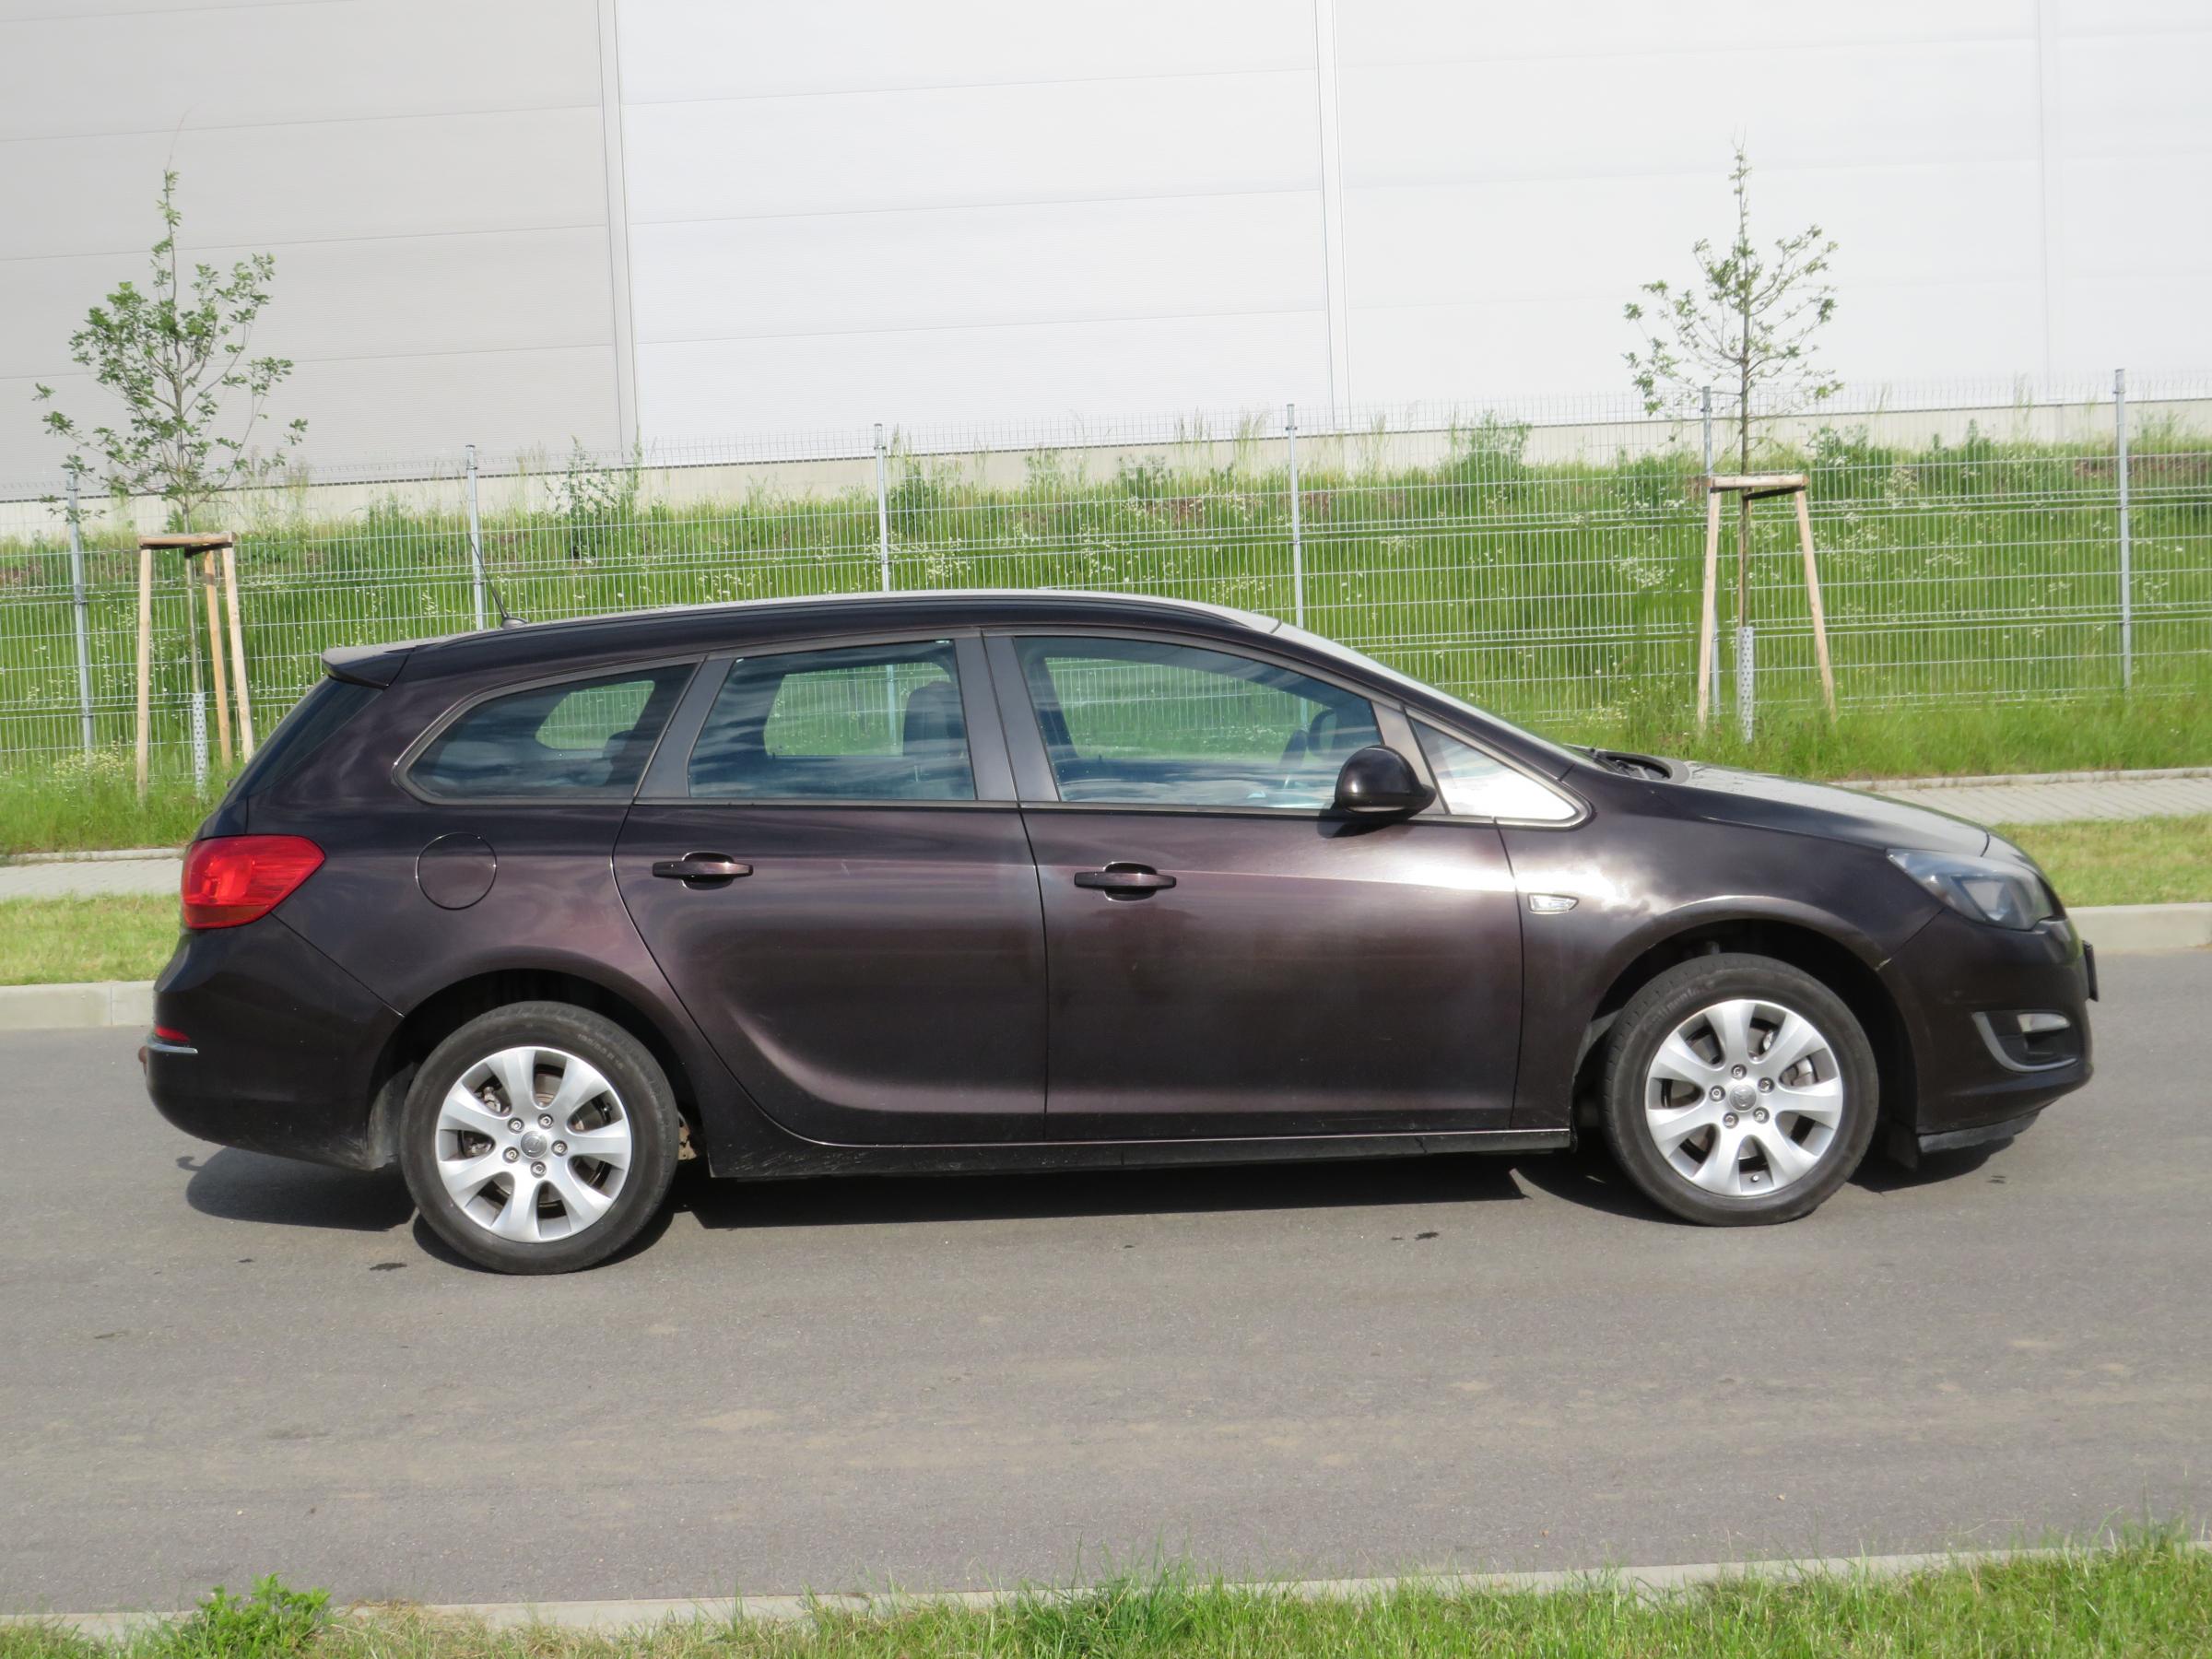 Opel Astra, 2013 - pohled č. 4